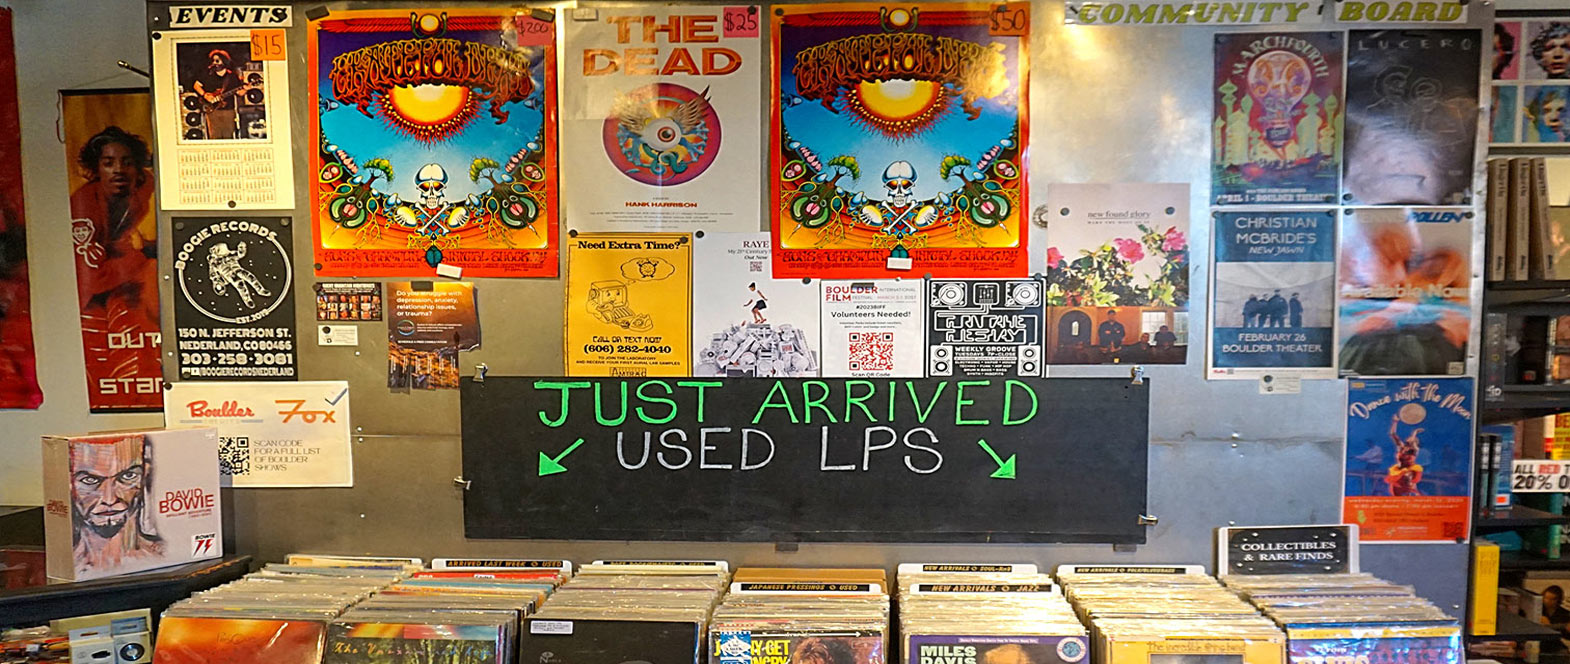 Humaan escaleren beest Paradise Found Records & Music – New and used vinyl records, CDs, audio  equipment and merchandise in Boulder, CO